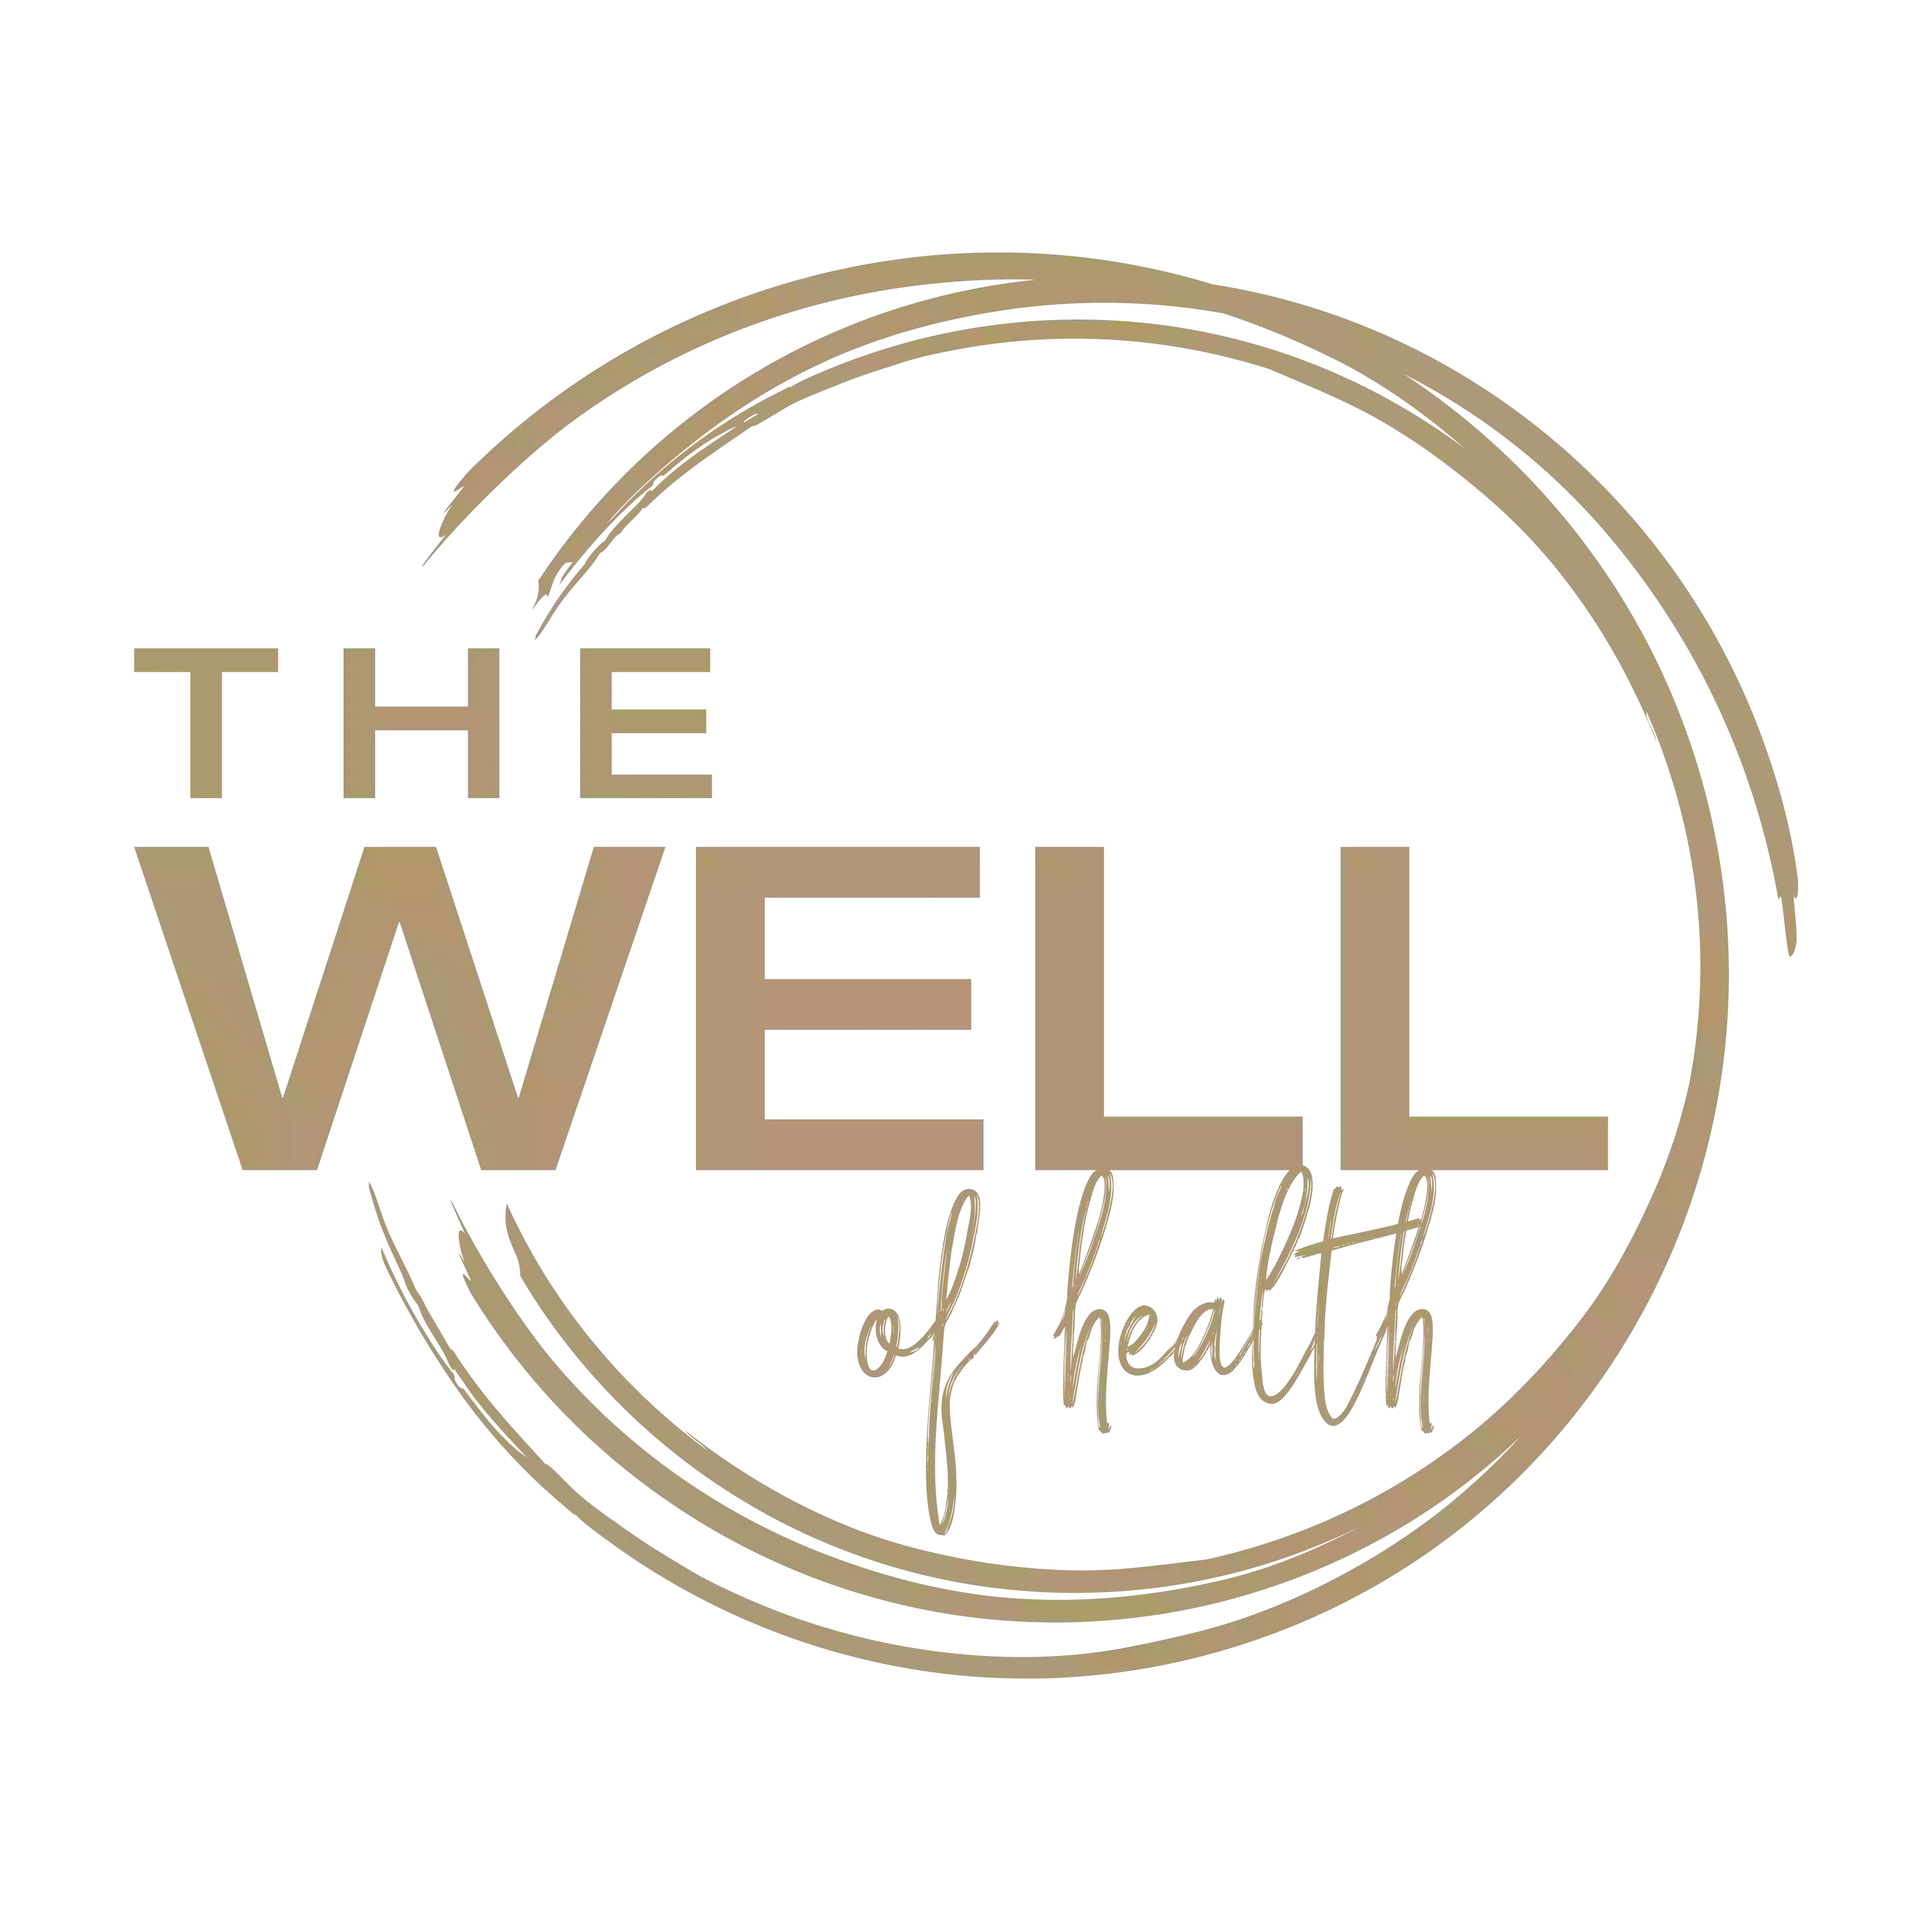 The WELL of Health